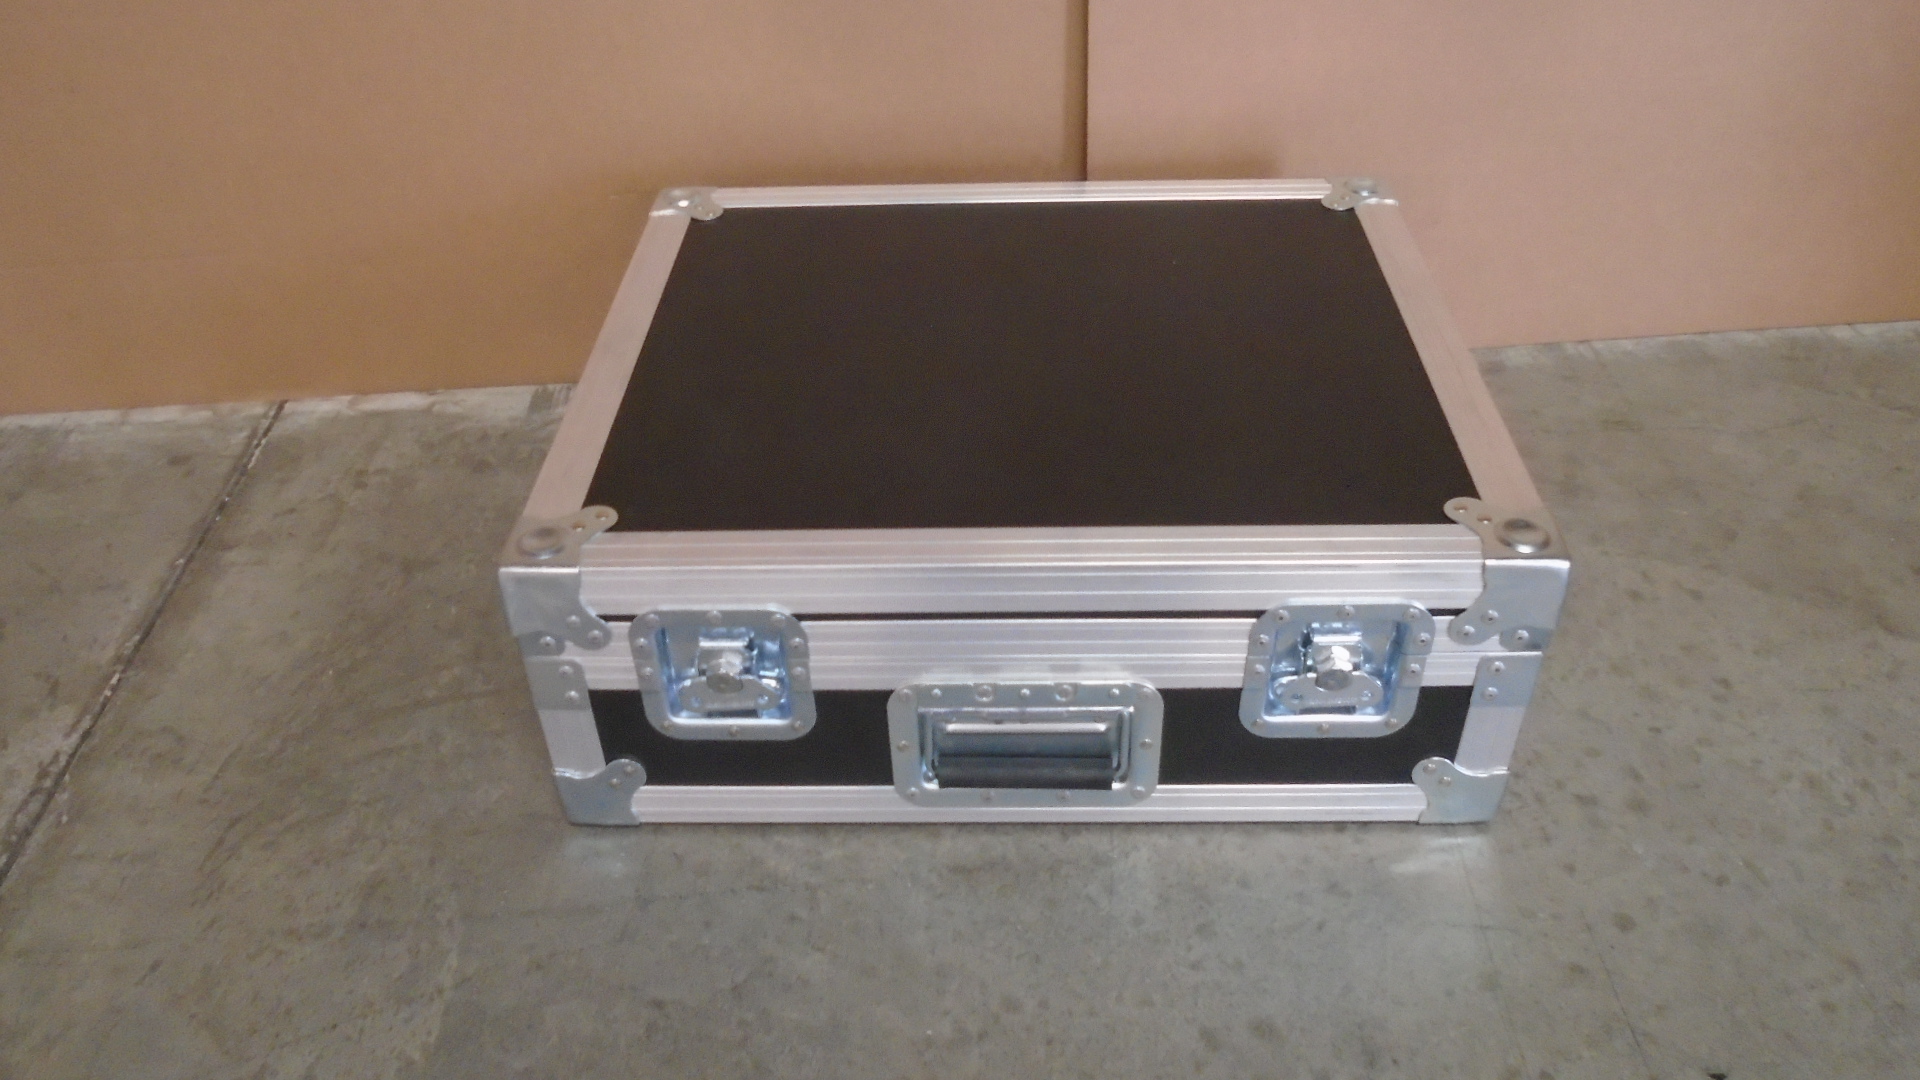 Print # 7580 - Custom Case for (1) Shure URD4 Dual Wireless Microphone Kit By Nelson Case Corp